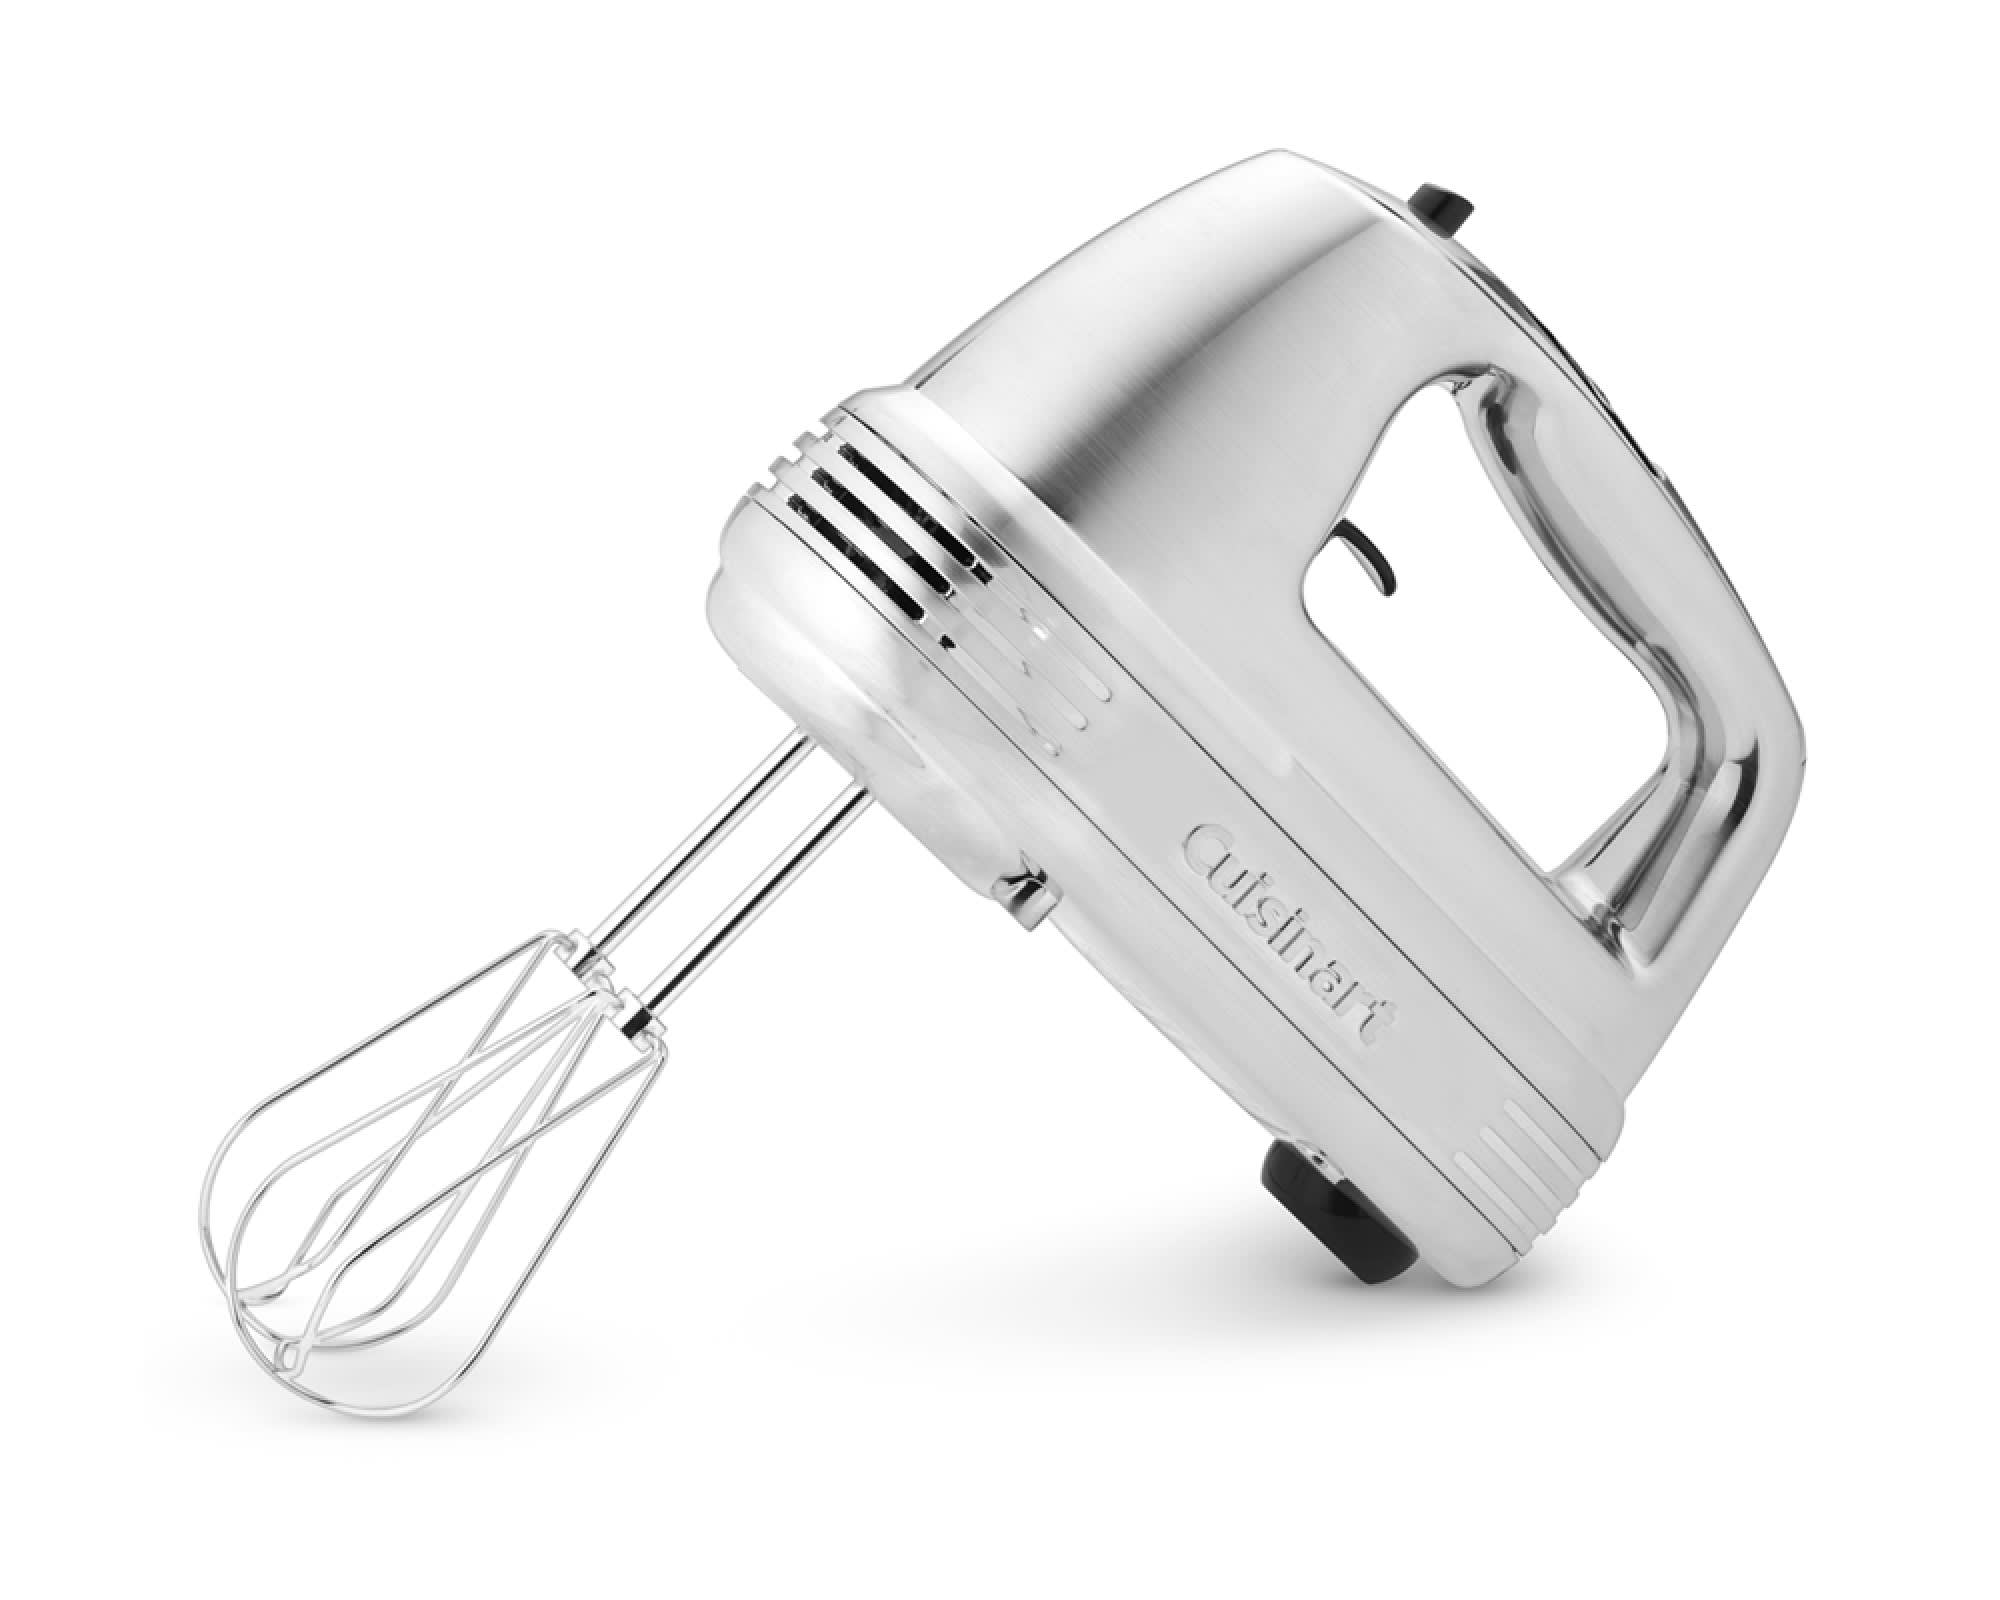 http://cdn.apartmenttherapy.info/image/upload/v1668548297/gen-workflow/product-listing/cuisinart_hand_mixer.jpg